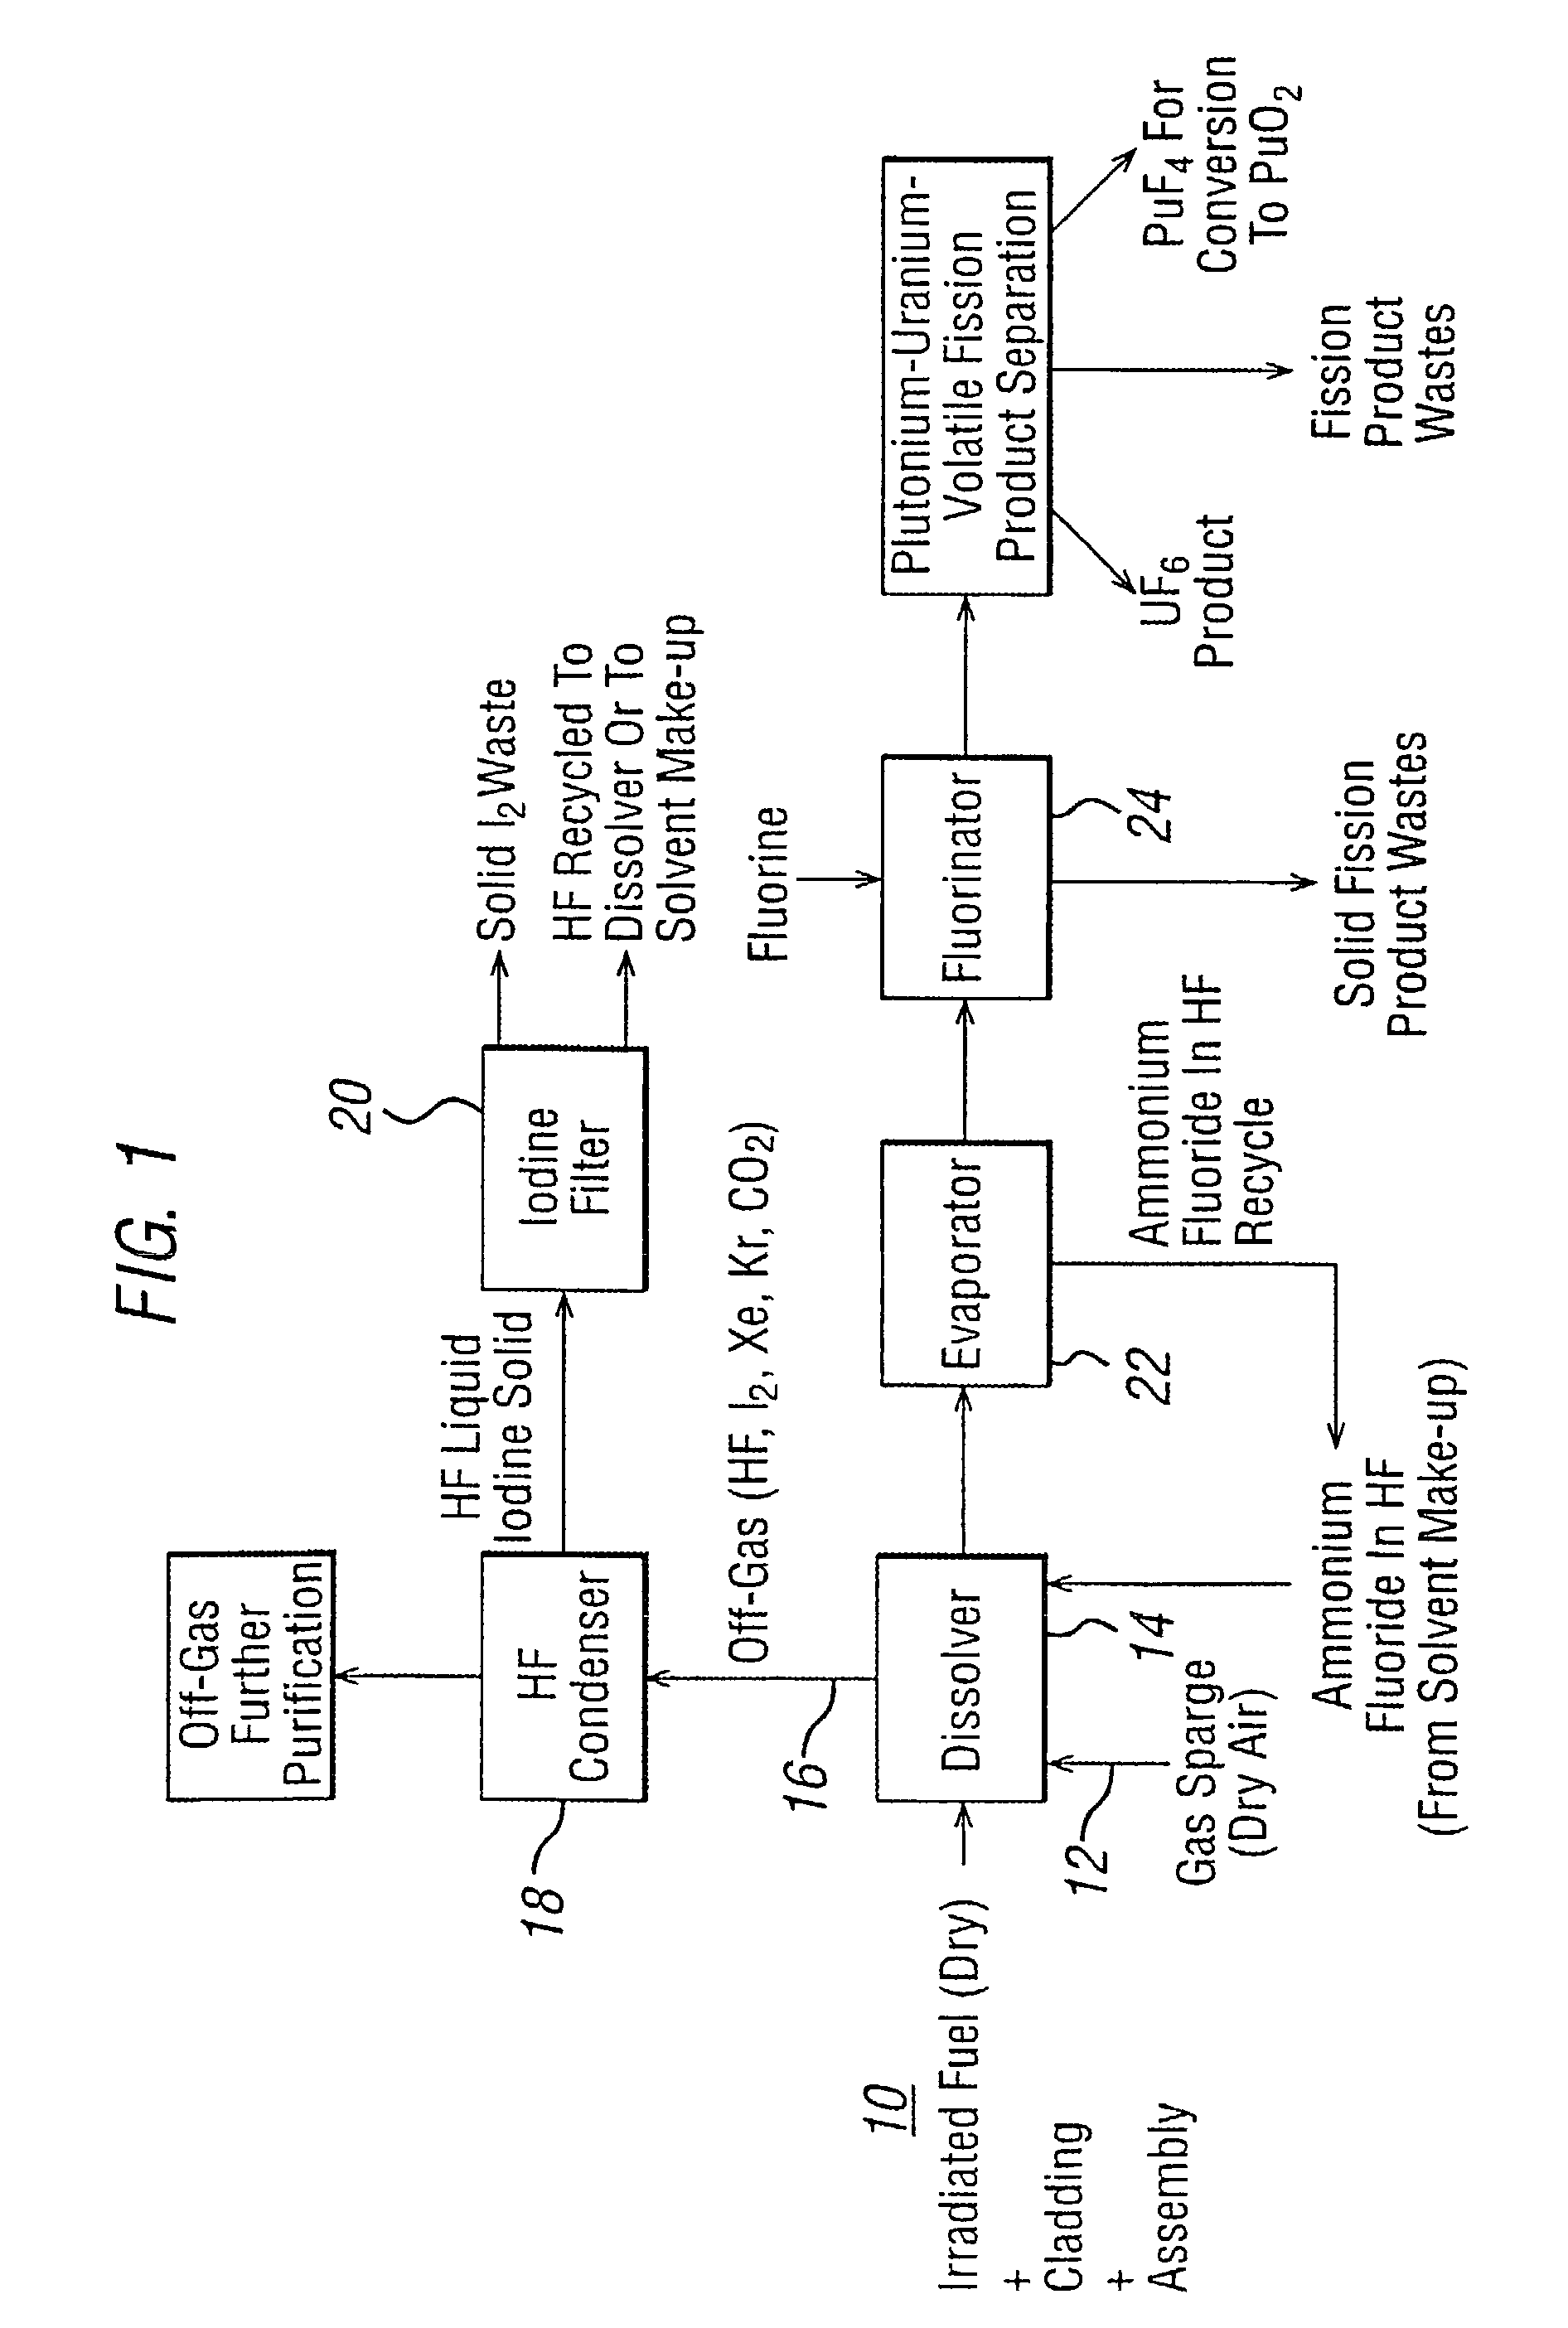 Method of separating uranium from irradiated nuclear fuel